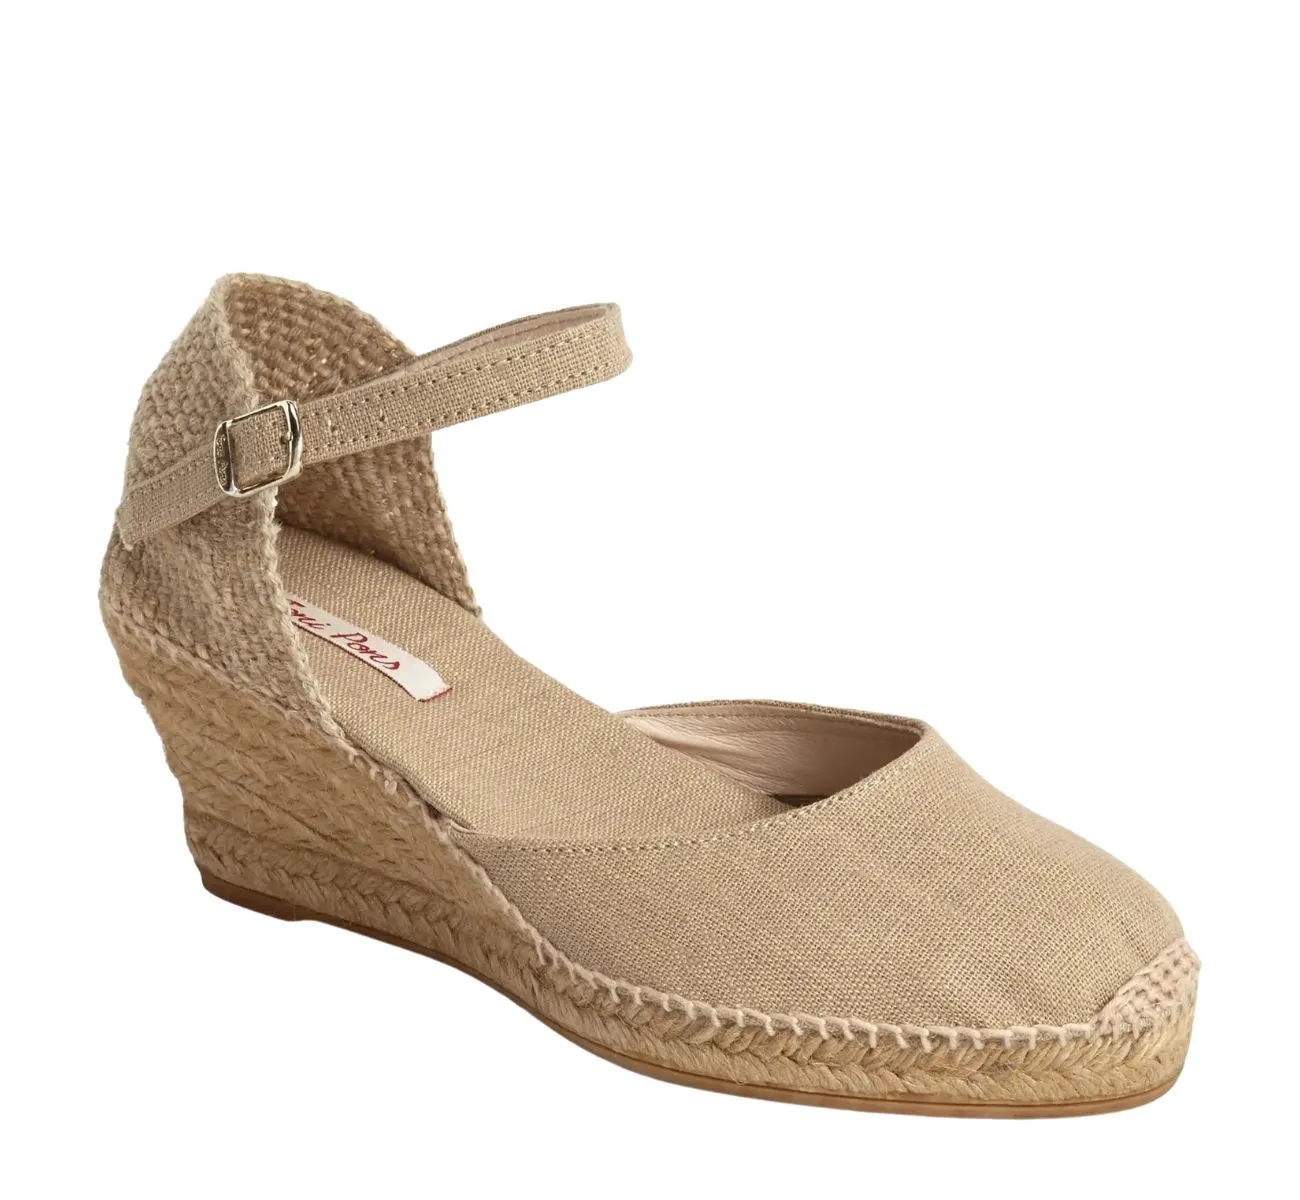 Beige closed toe fabric espadrille with ankle strap on white background.